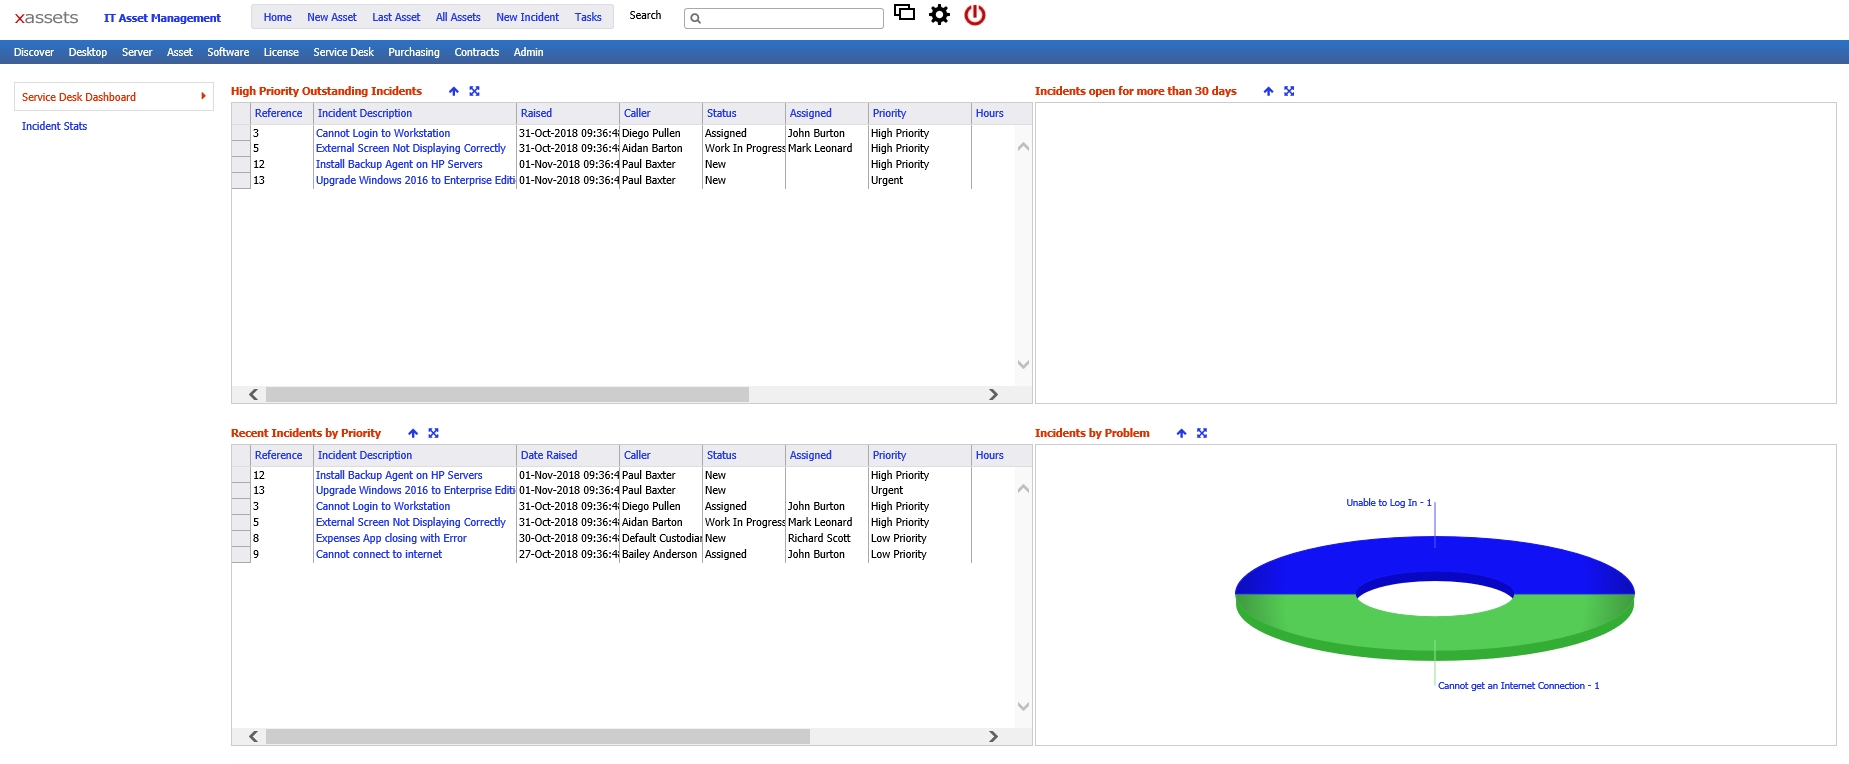 Screenshot from the xAssets product suite